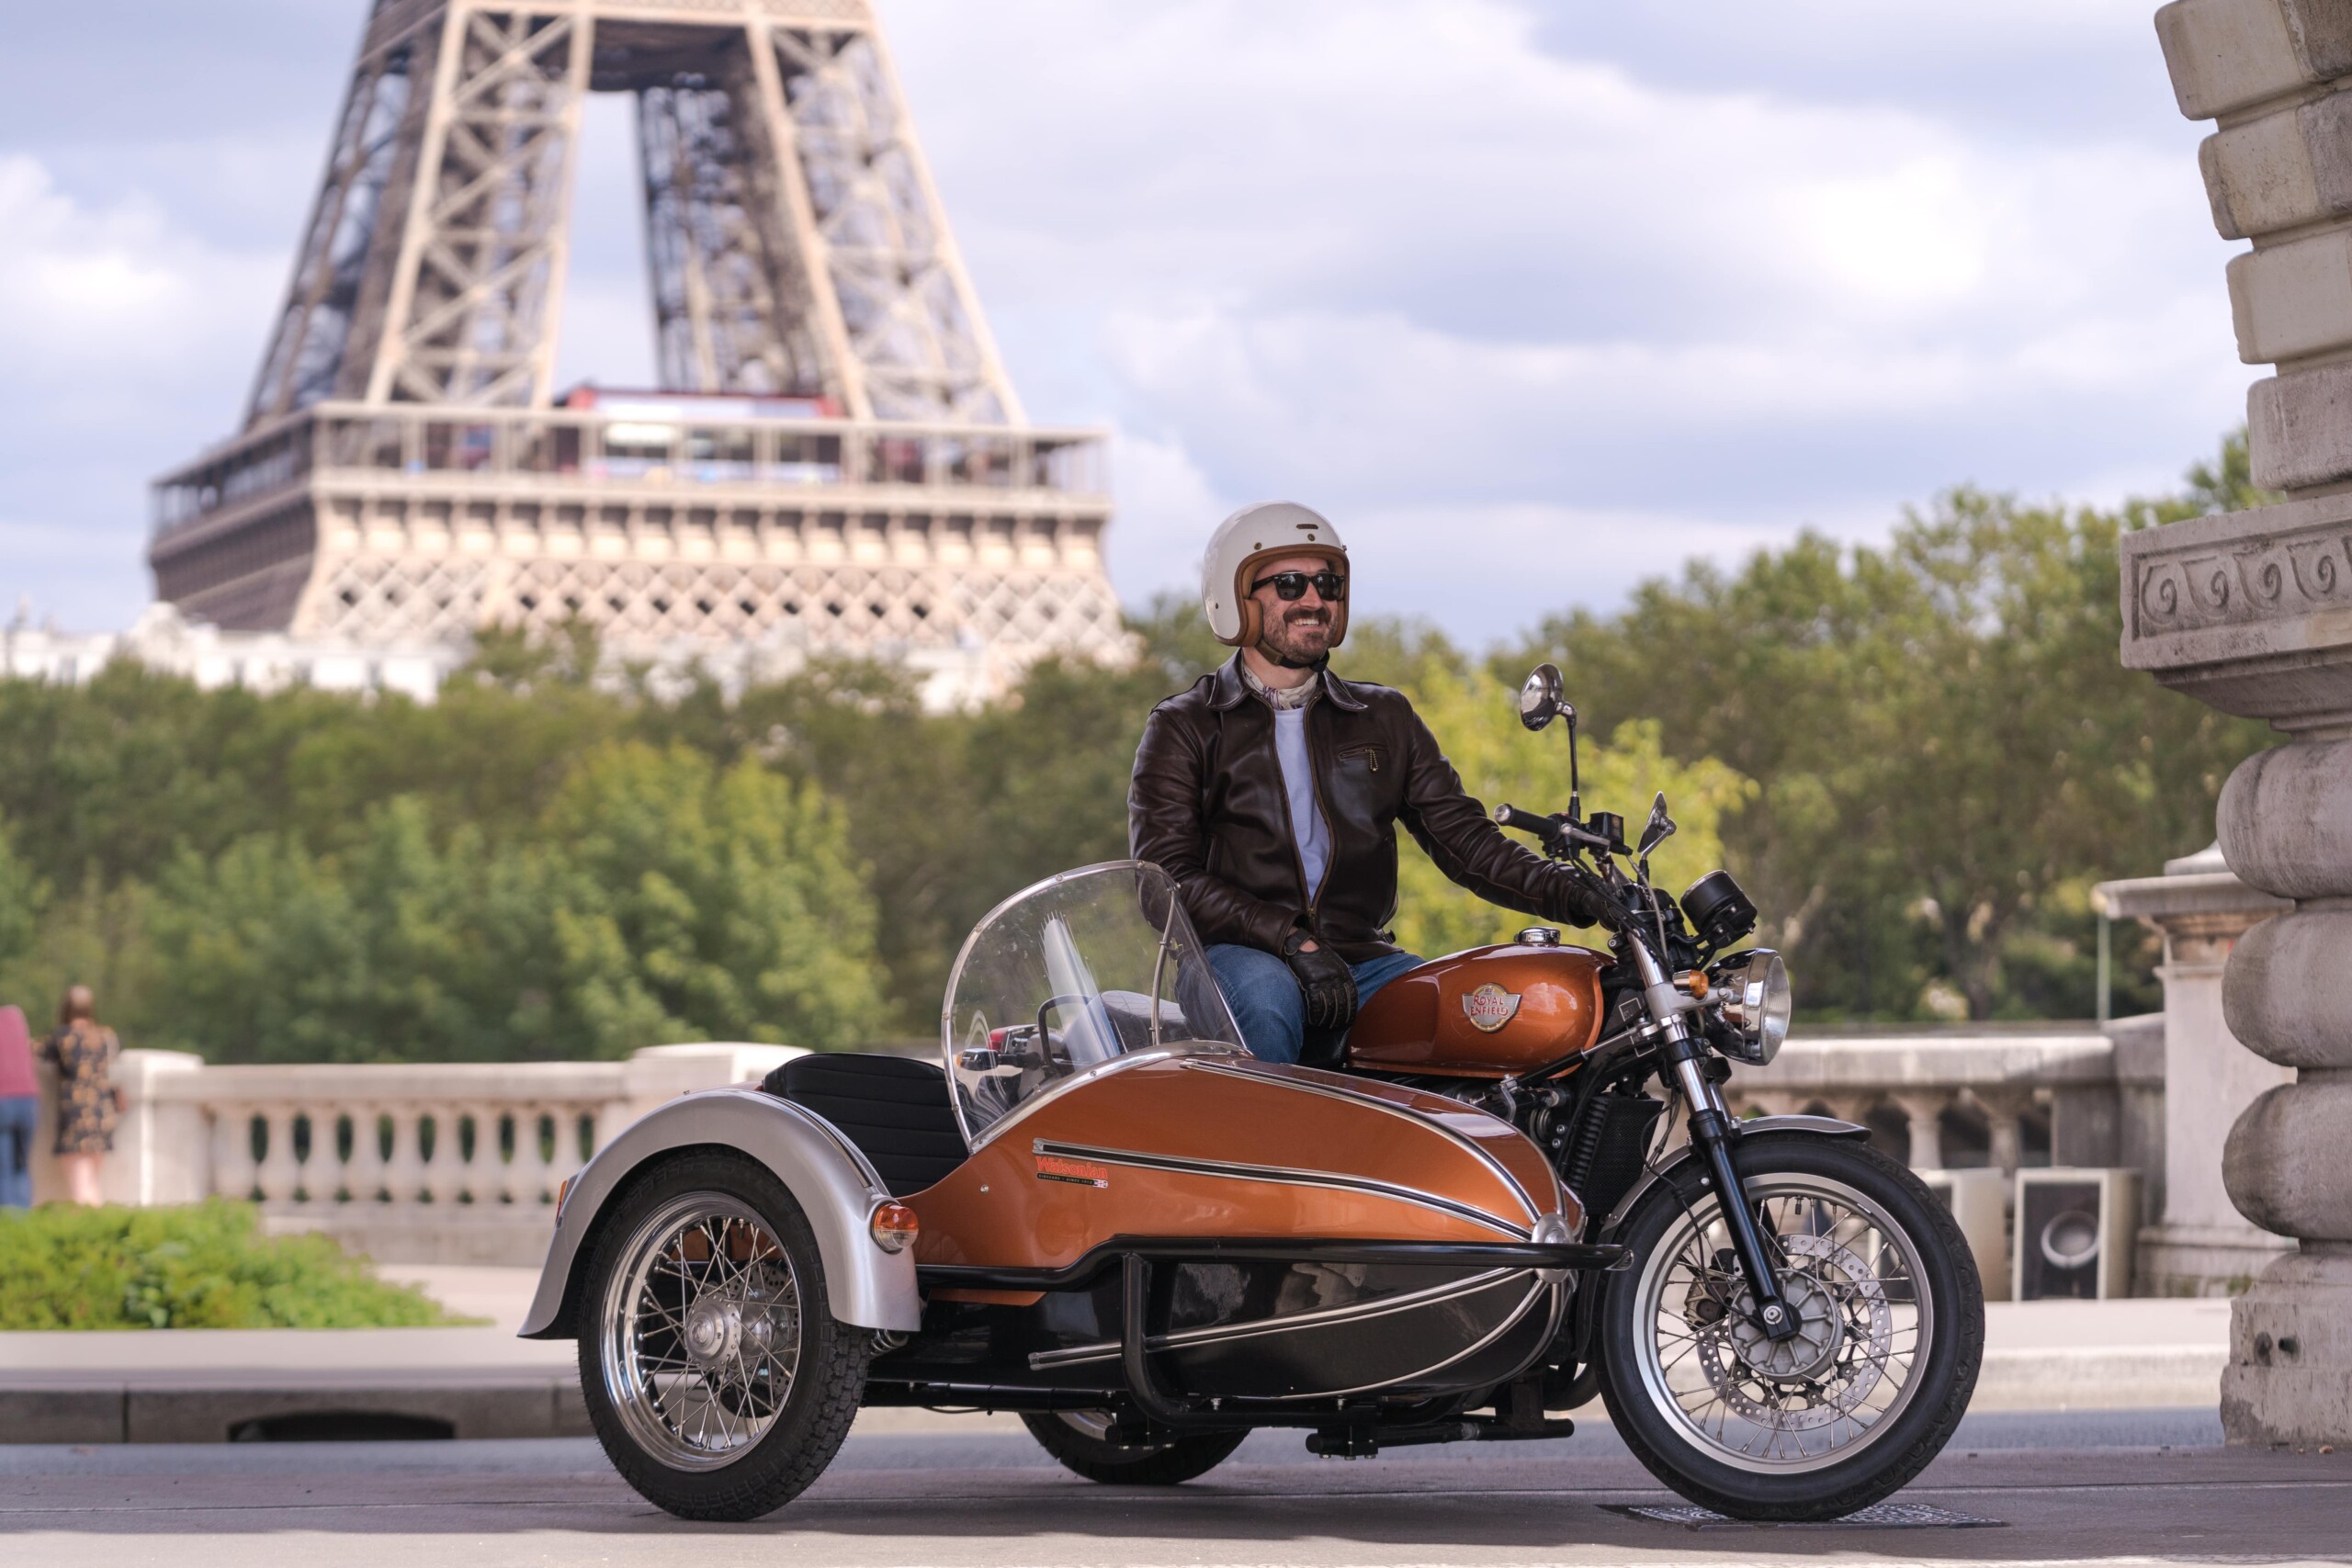 A motorcycle with a sidecar in front of the Eiffel Tower